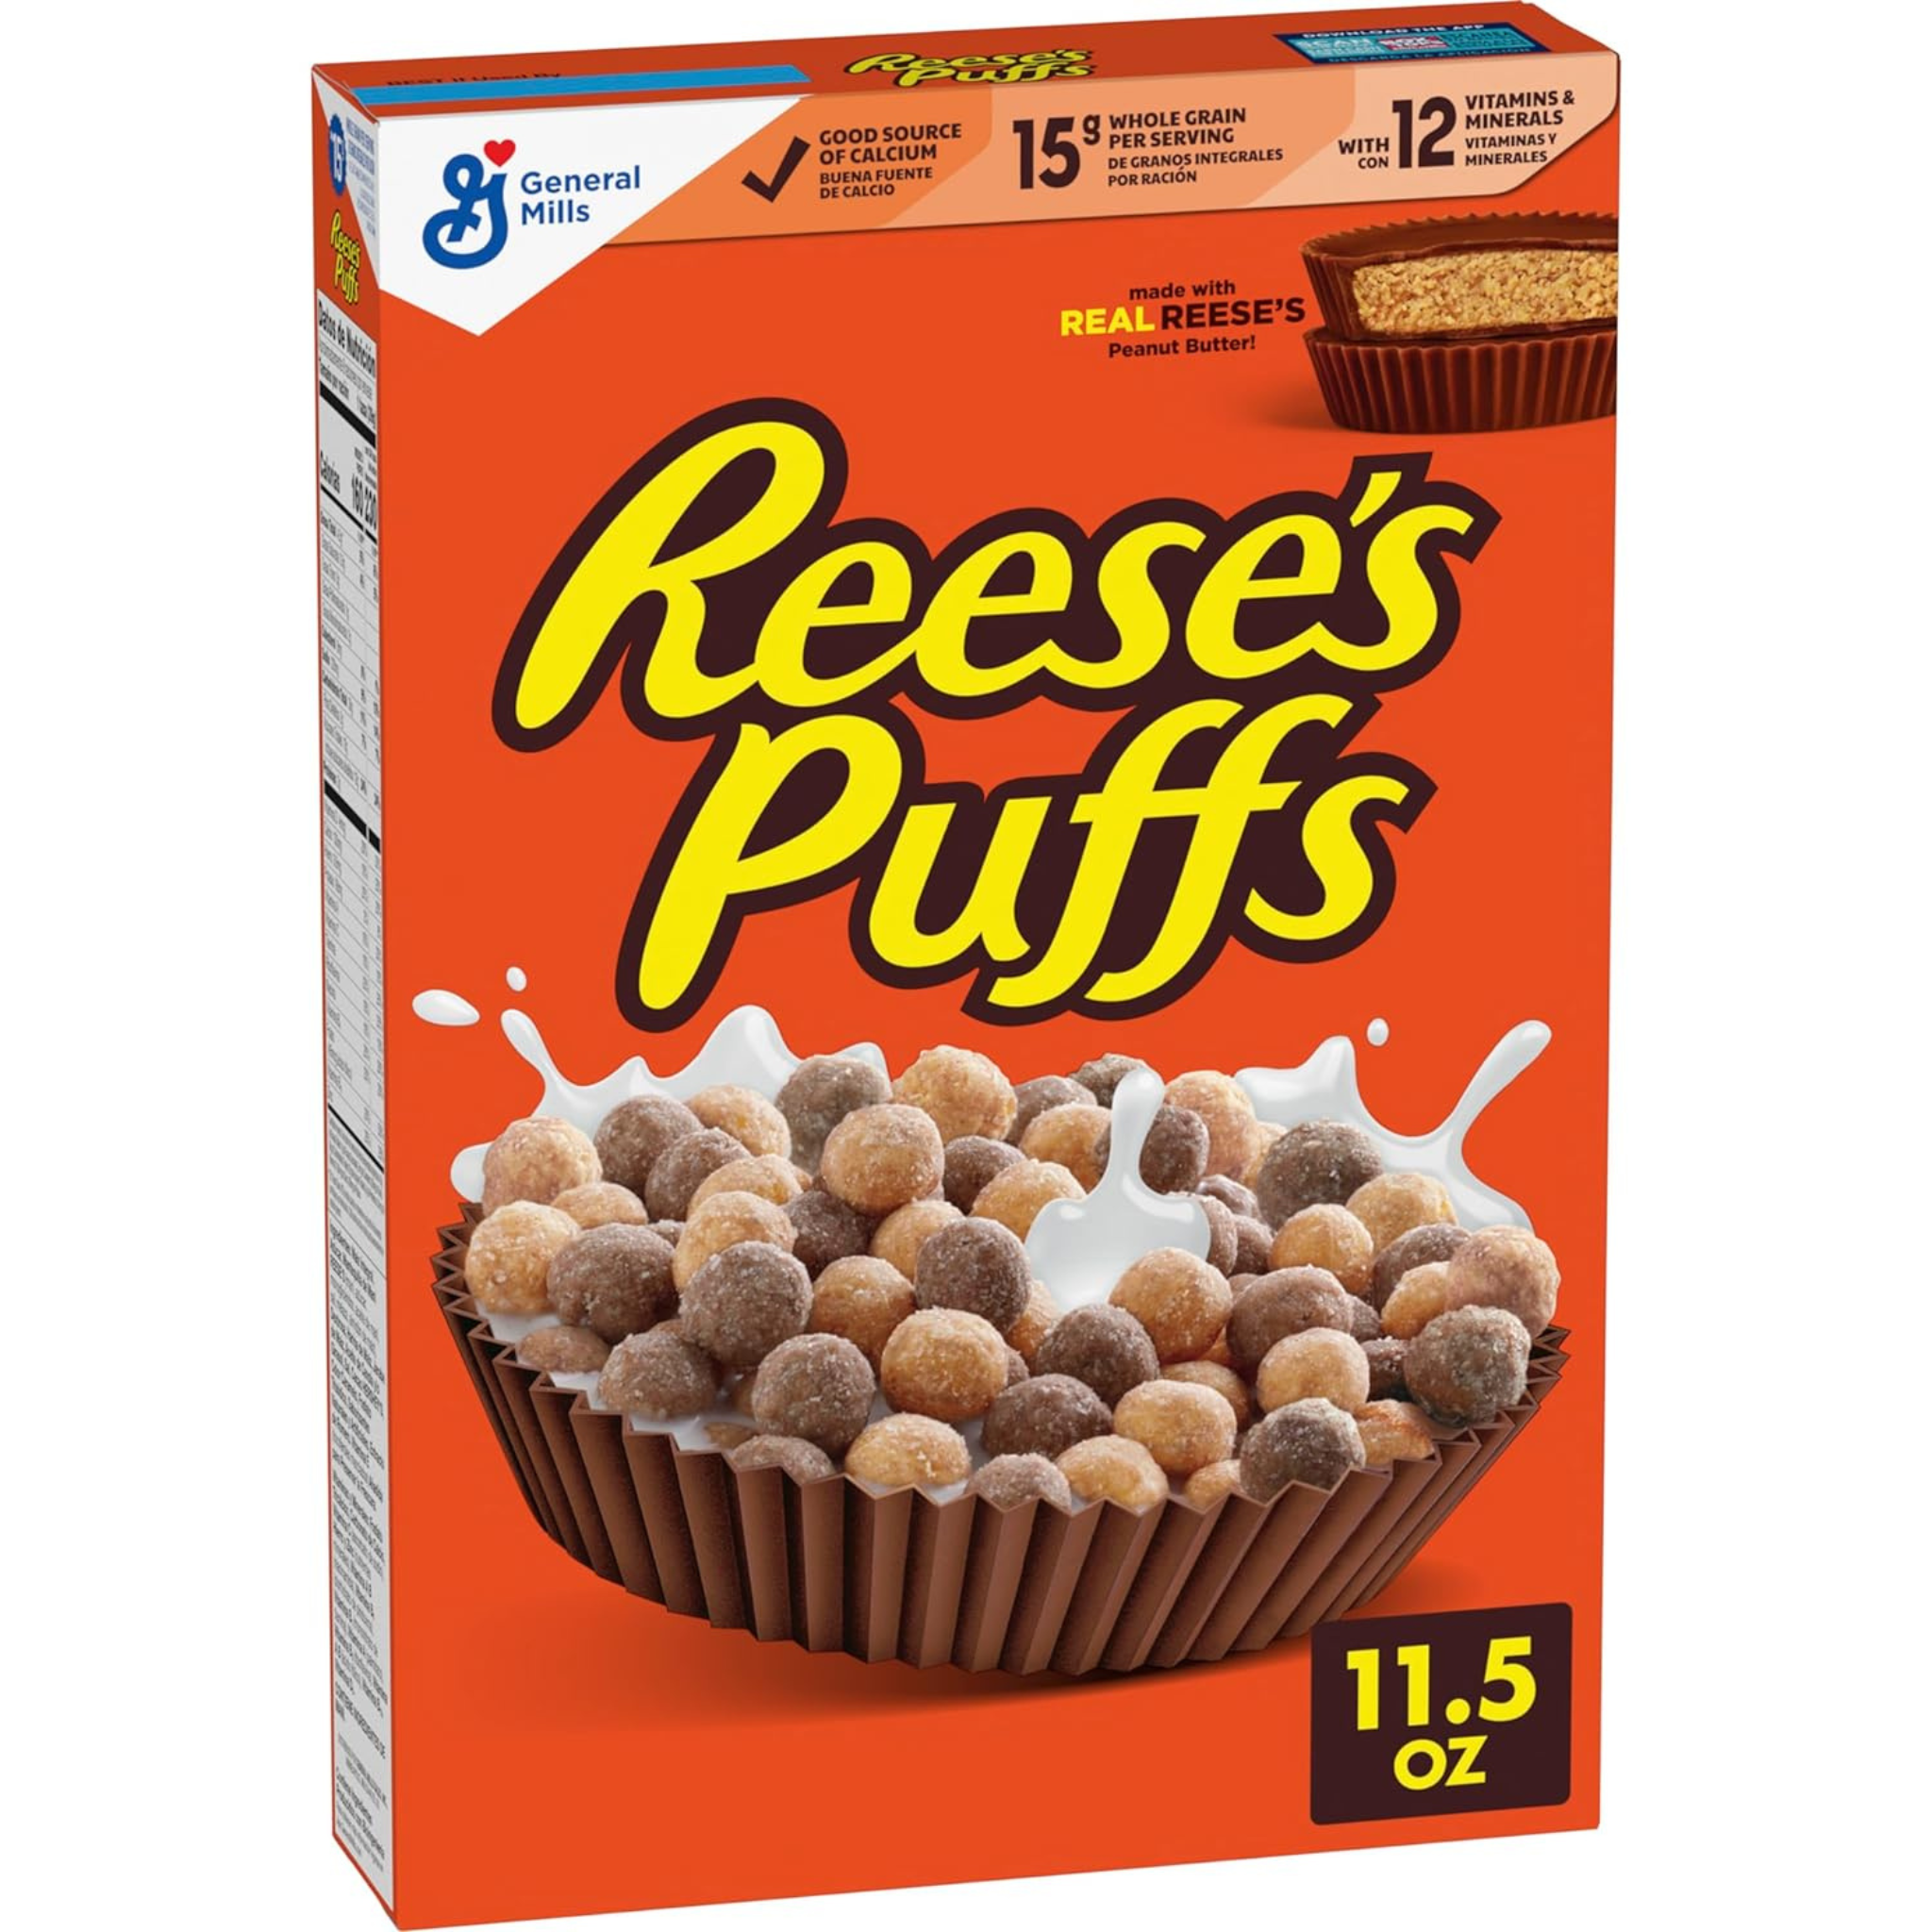 Get 2 Boxes Of Reese's Puffs Cereal, 11.5 OZ Box